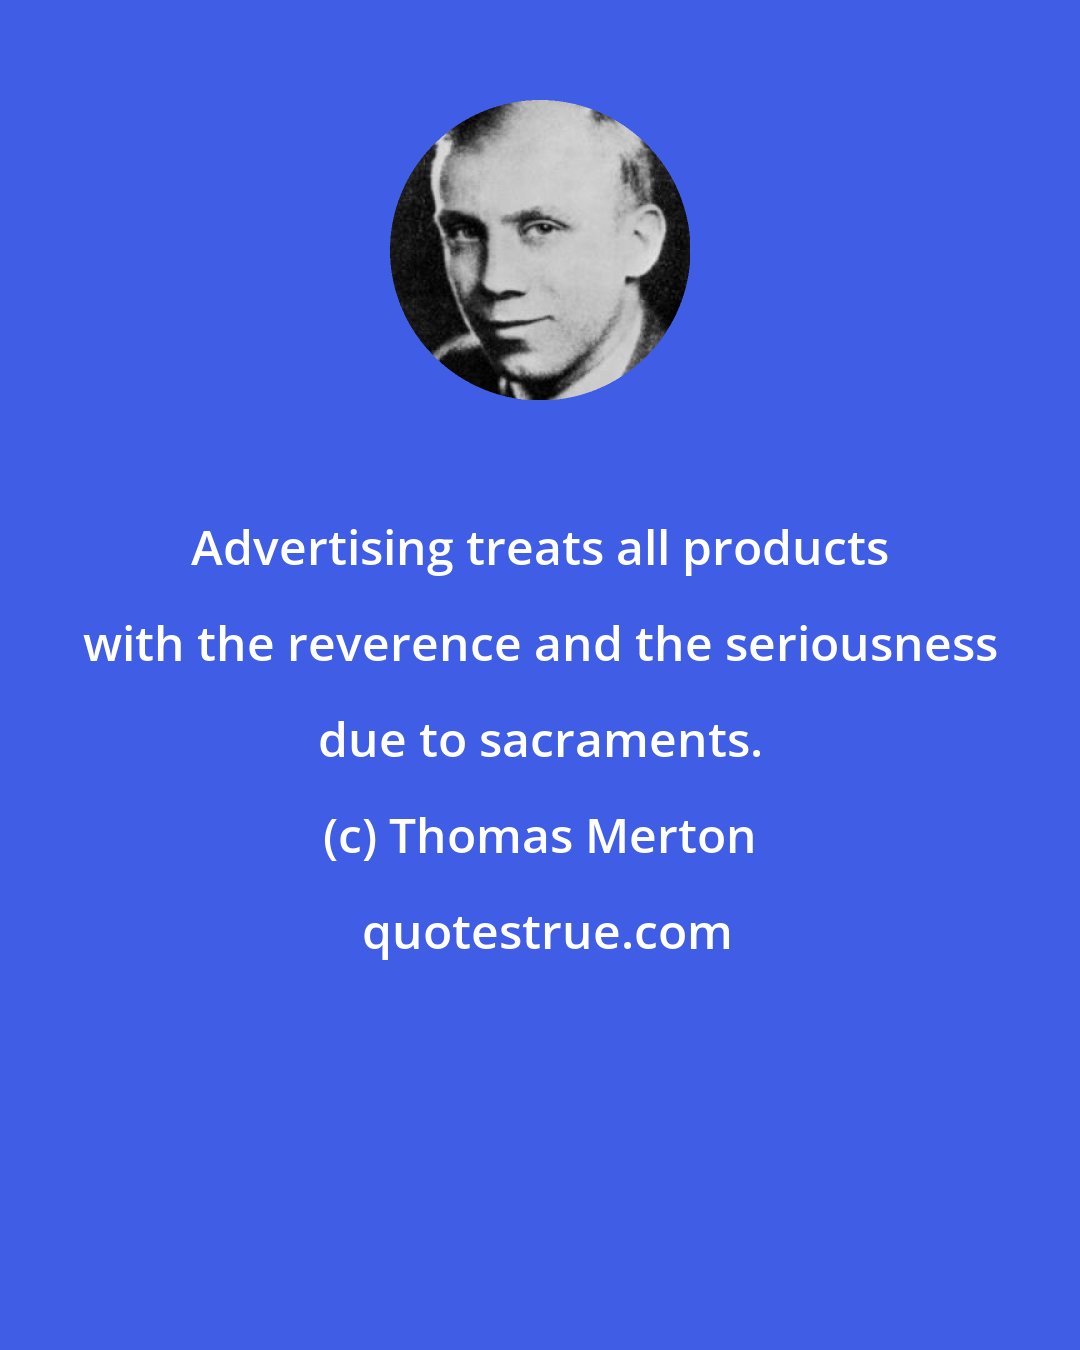 Thomas Merton: Advertising treats all products with the reverence and the seriousness due to sacraments.